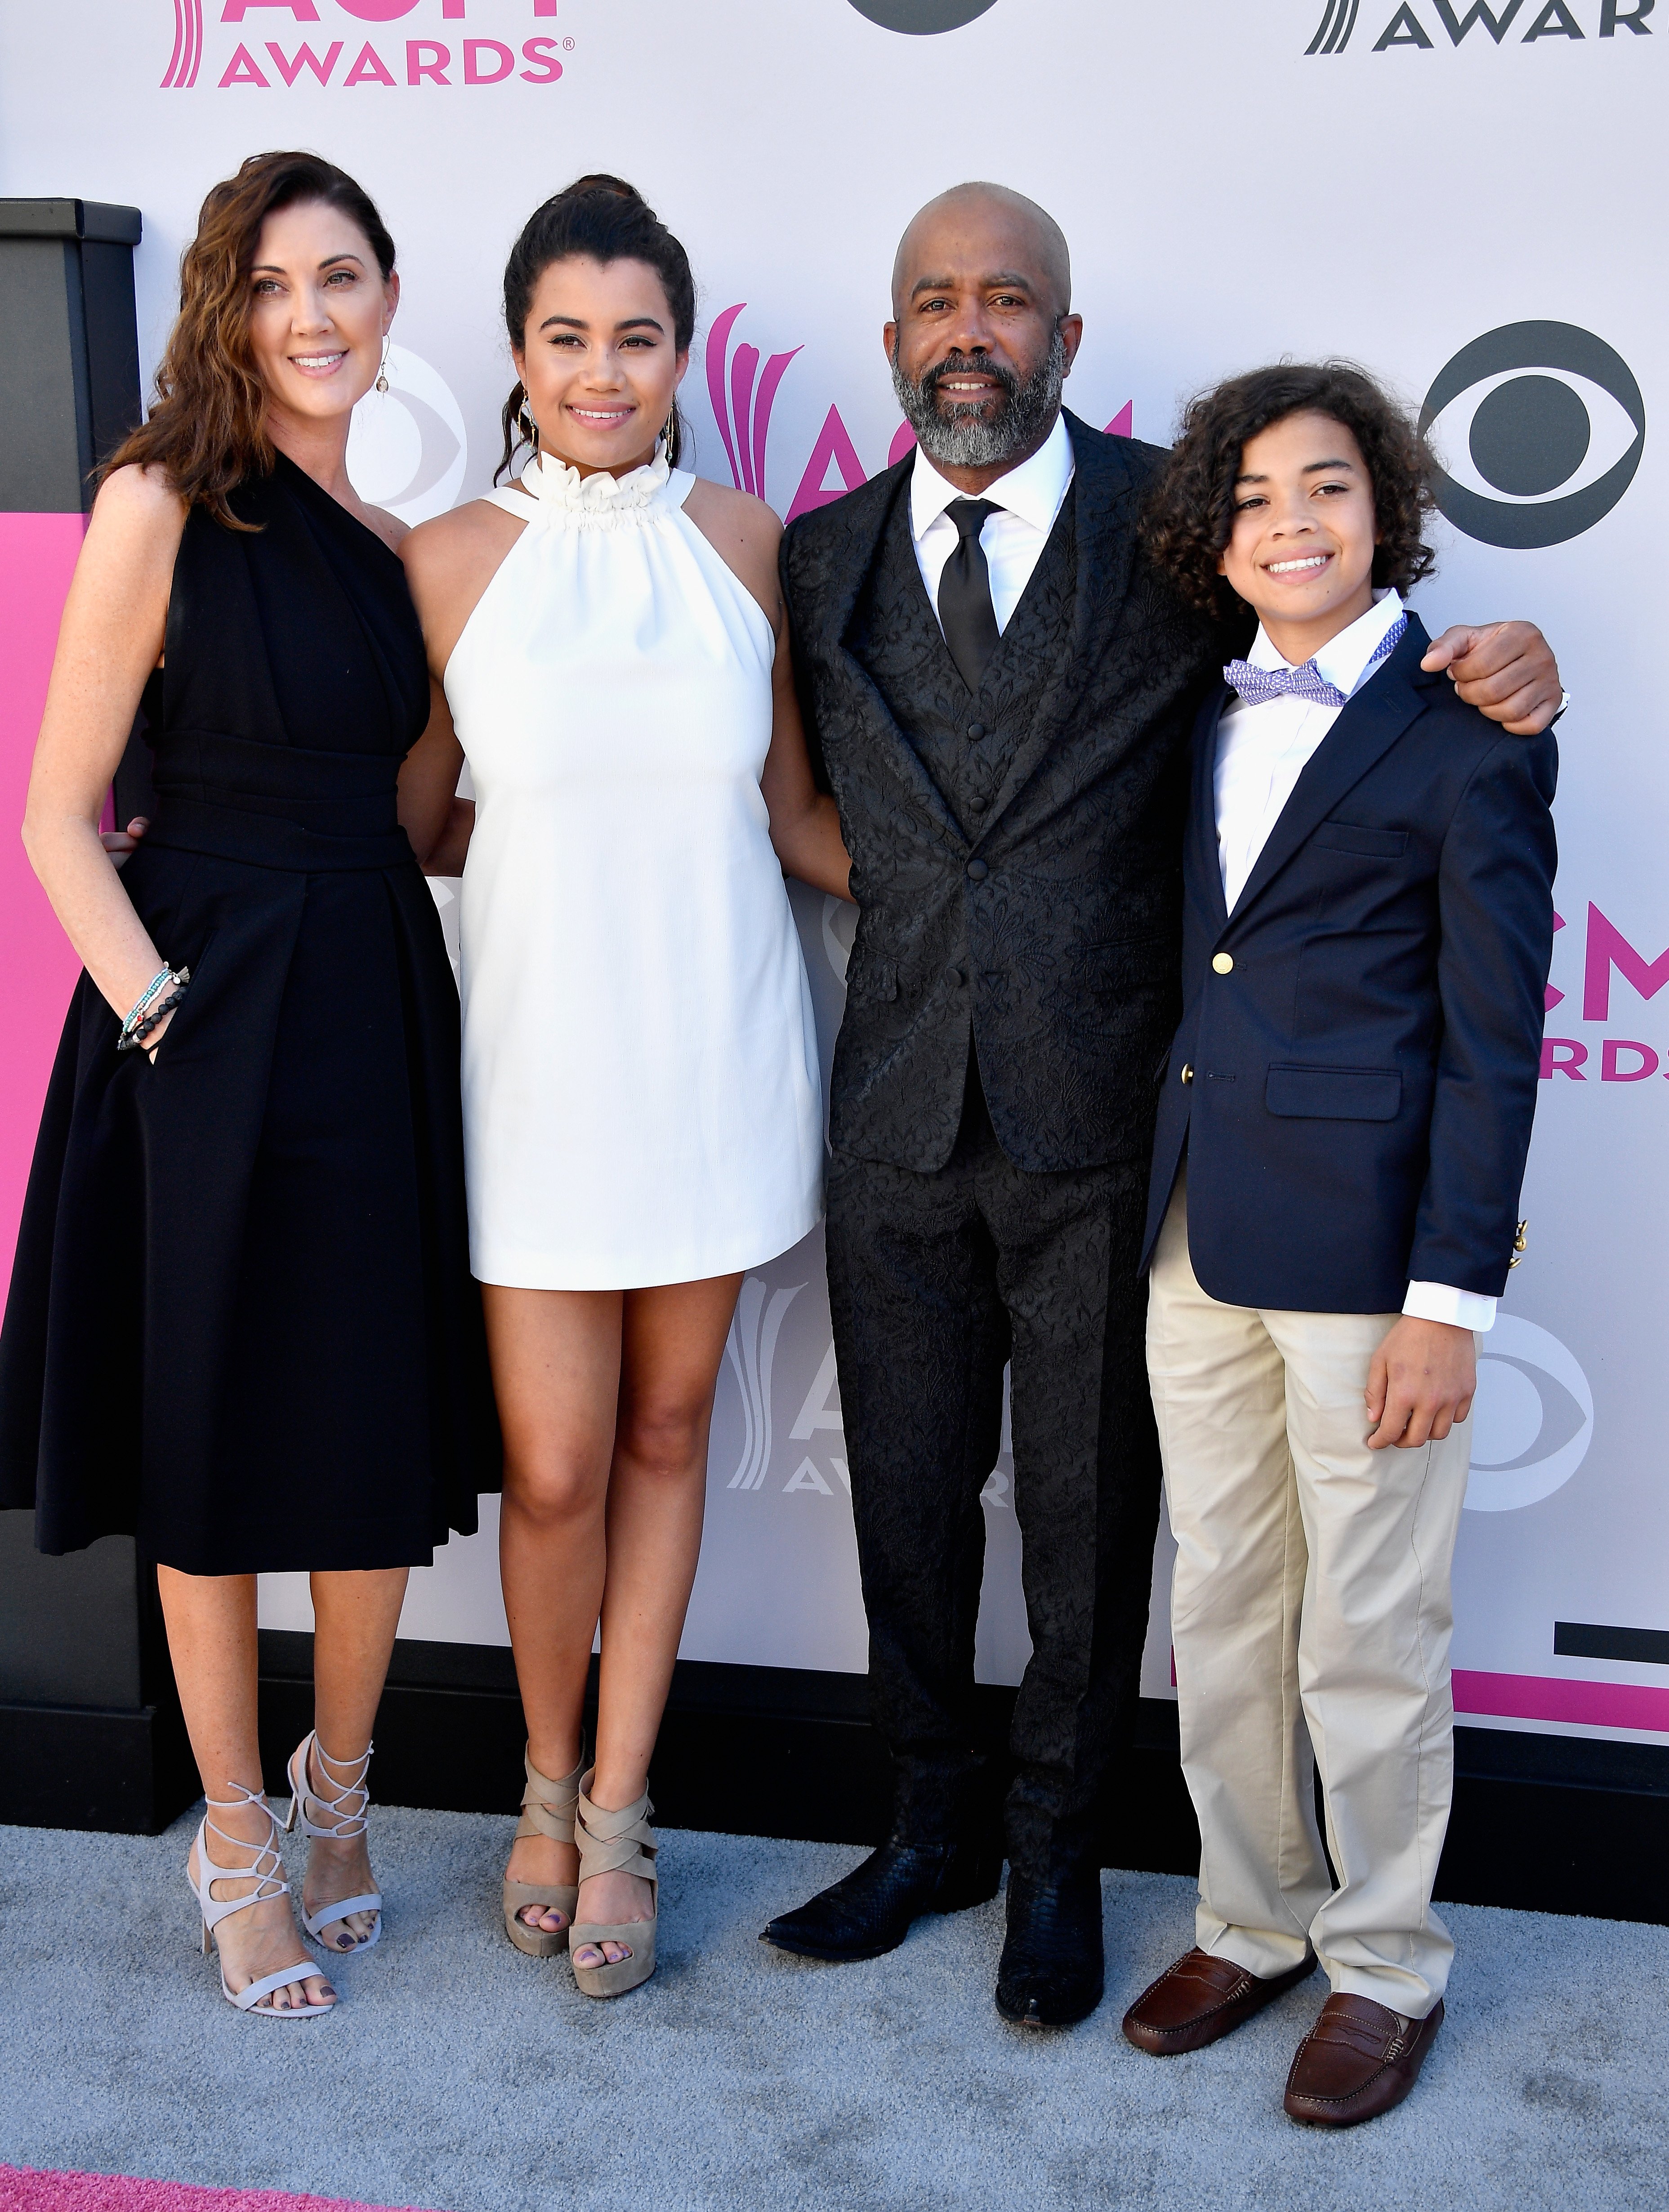 Beth Leonard, Daniella Rose Rucker, Darius Rucker, and Jack Rucker attend the 52nd Academy Of Country Music Awards at Toshiba Plaza in Las Vegas, Nevada on April 2, 2017 | Source: Getty Images